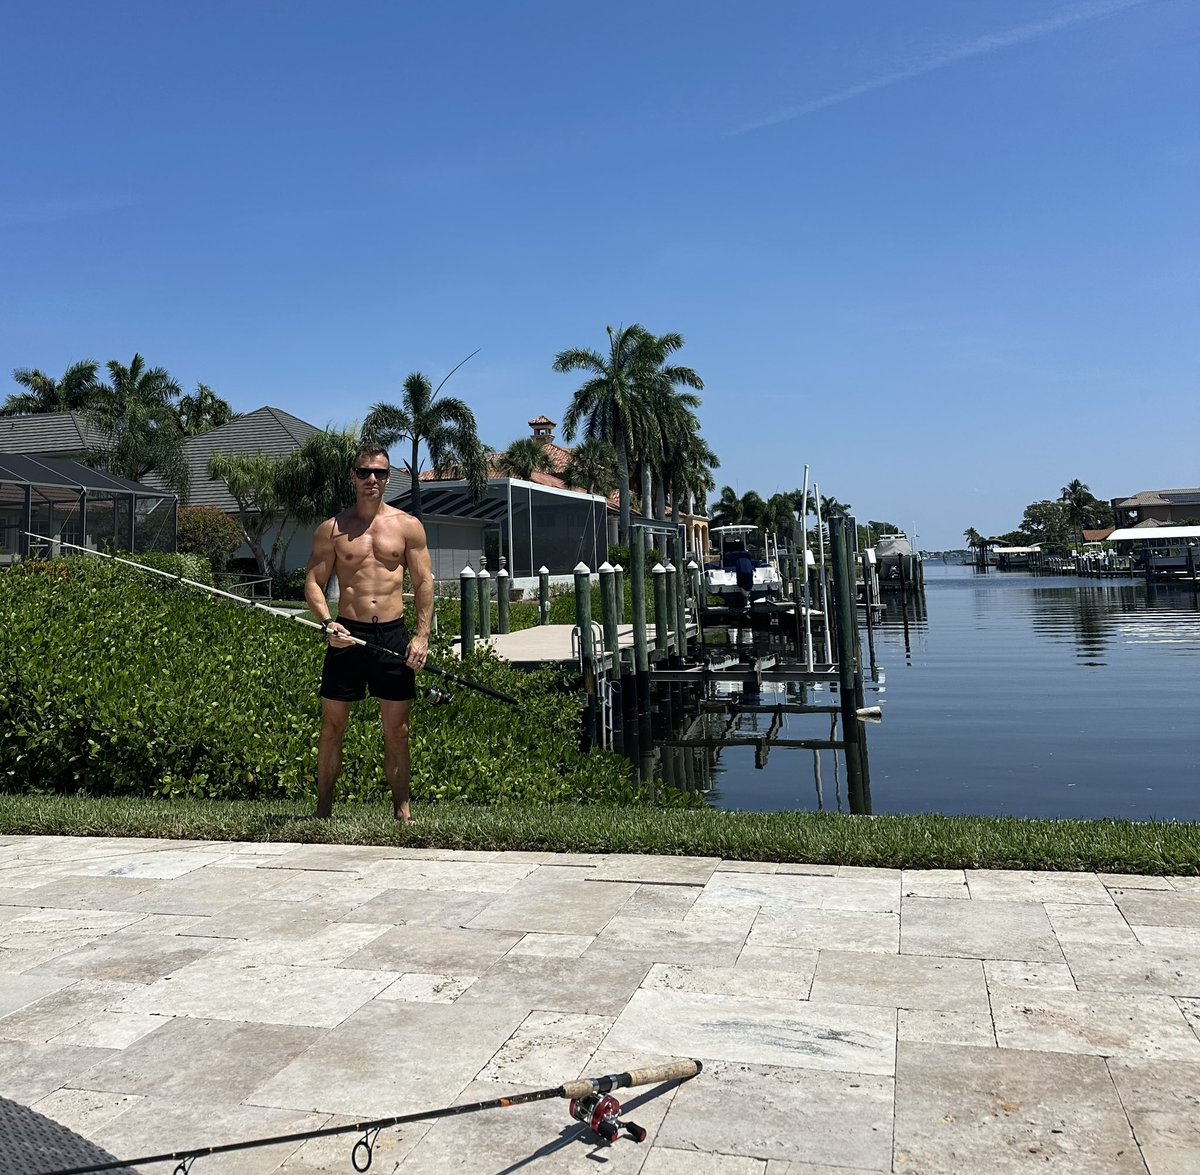 Home fishing and hanging by the pool for Memorial Day weekend.